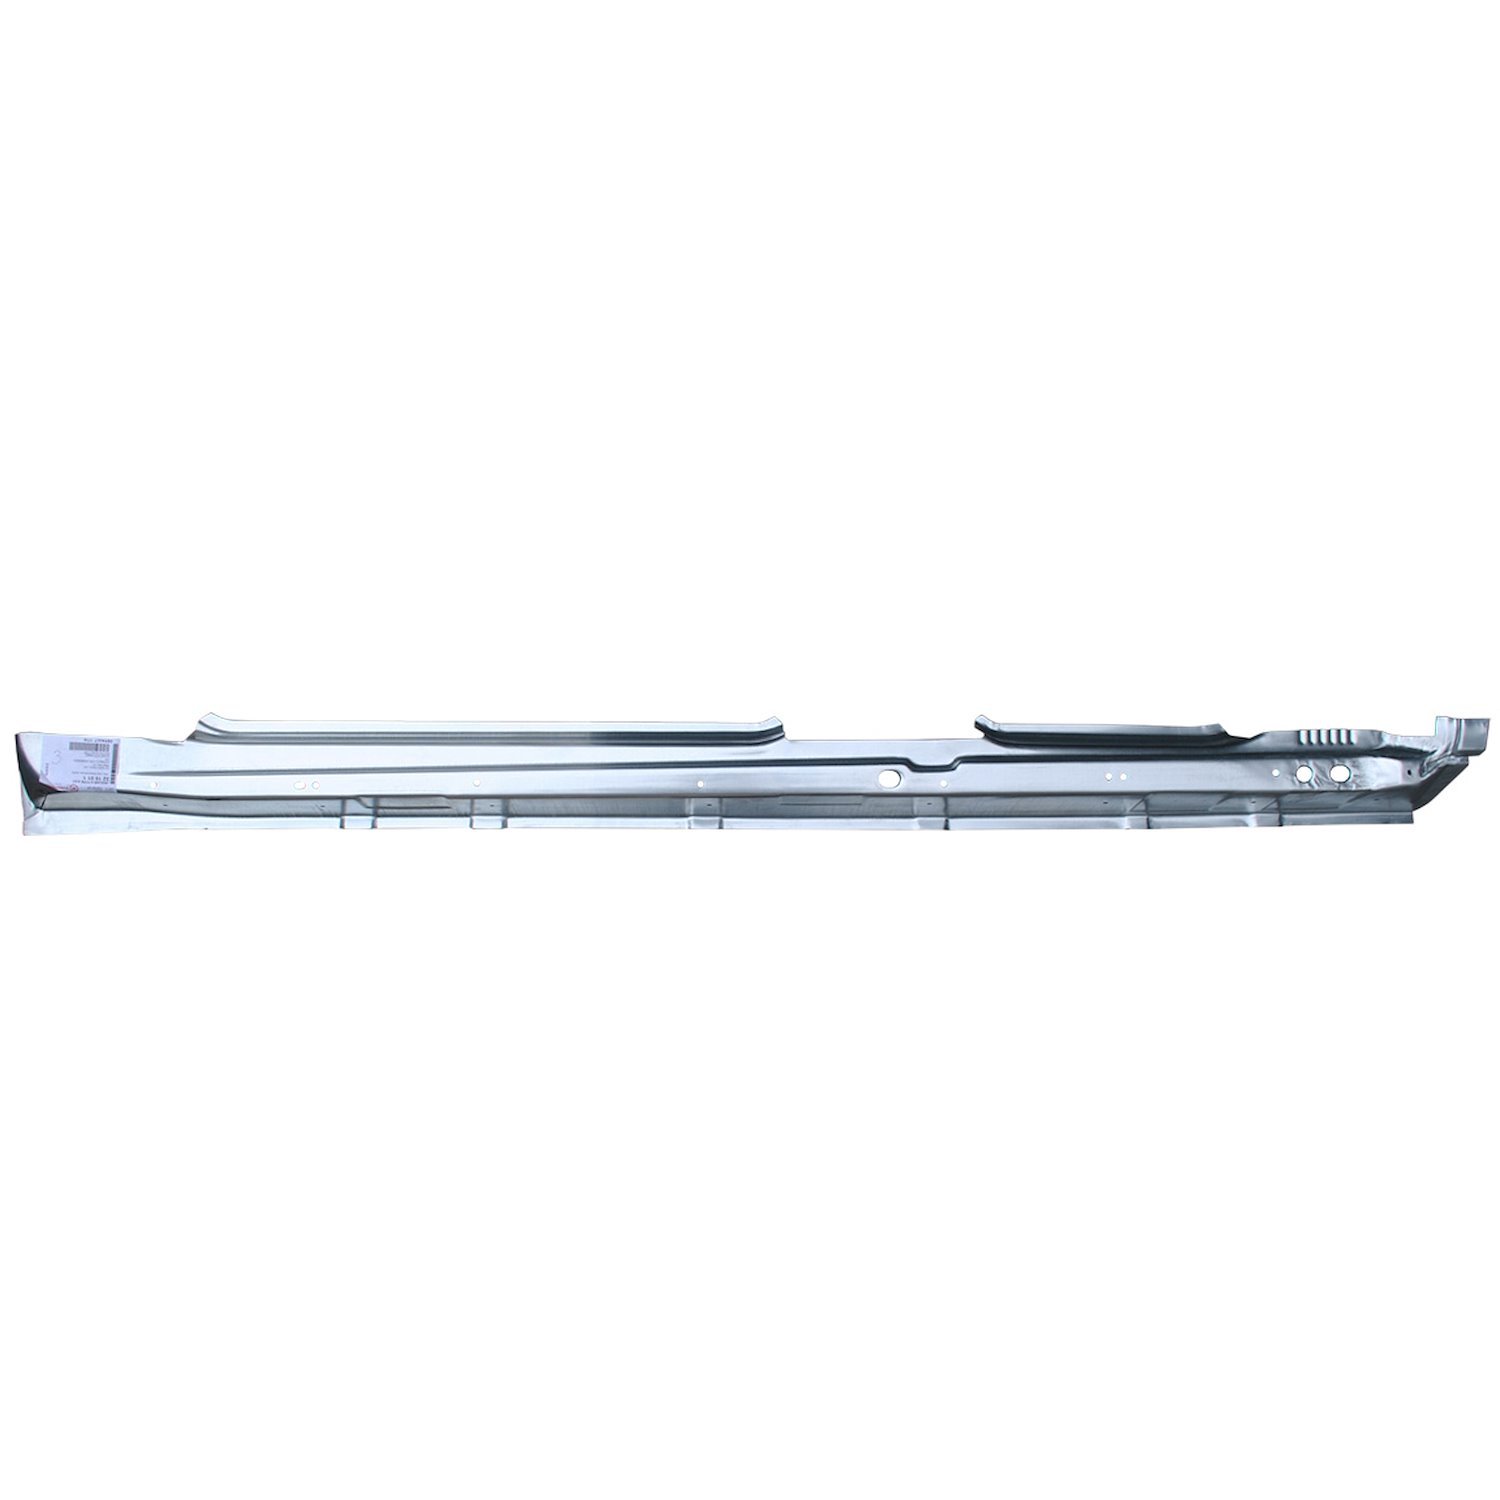 OE-Style Replacement Rocker Panel